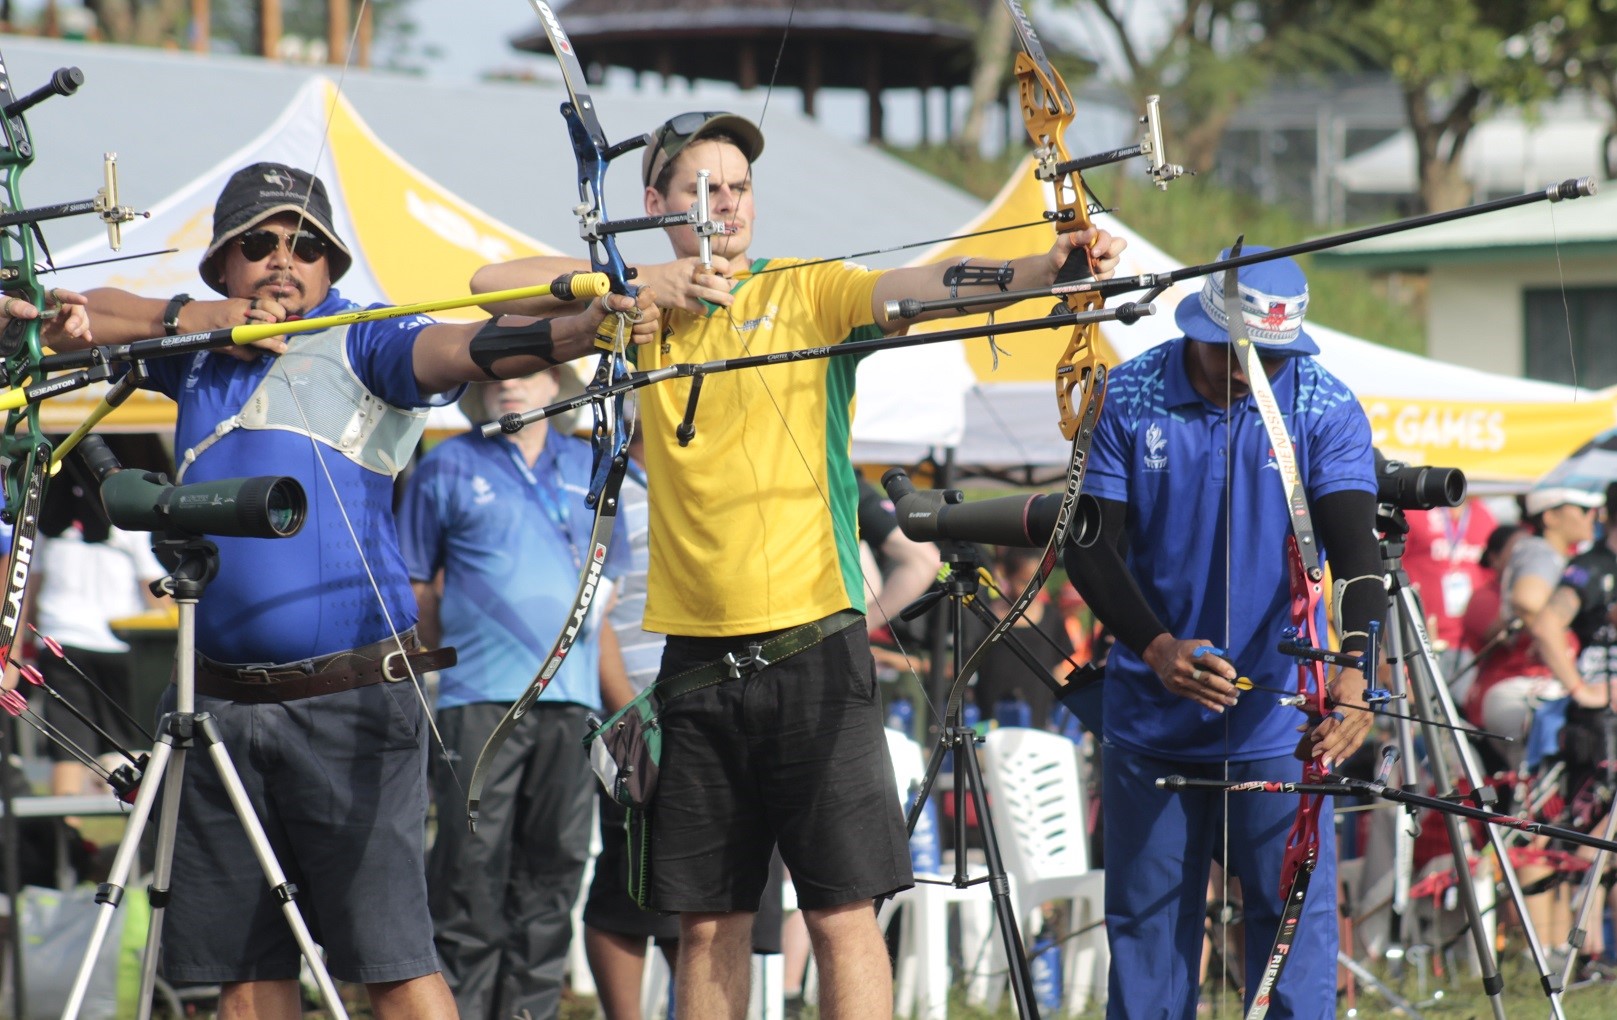 Men competing in archery